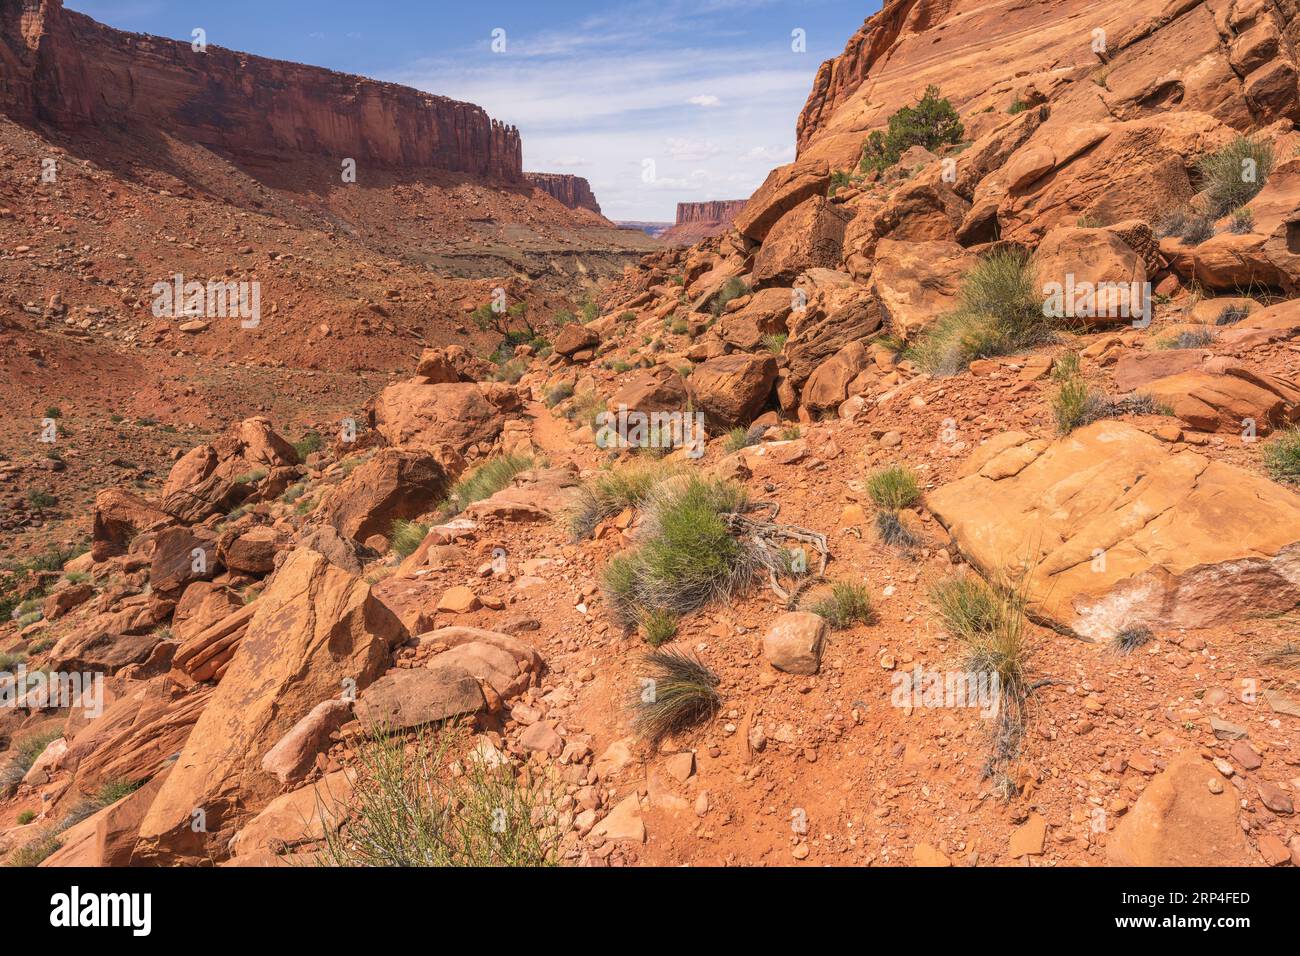 hiking the syncline loop trail in island in the sky district of canyonlands national park in utah, usa Stock Photo